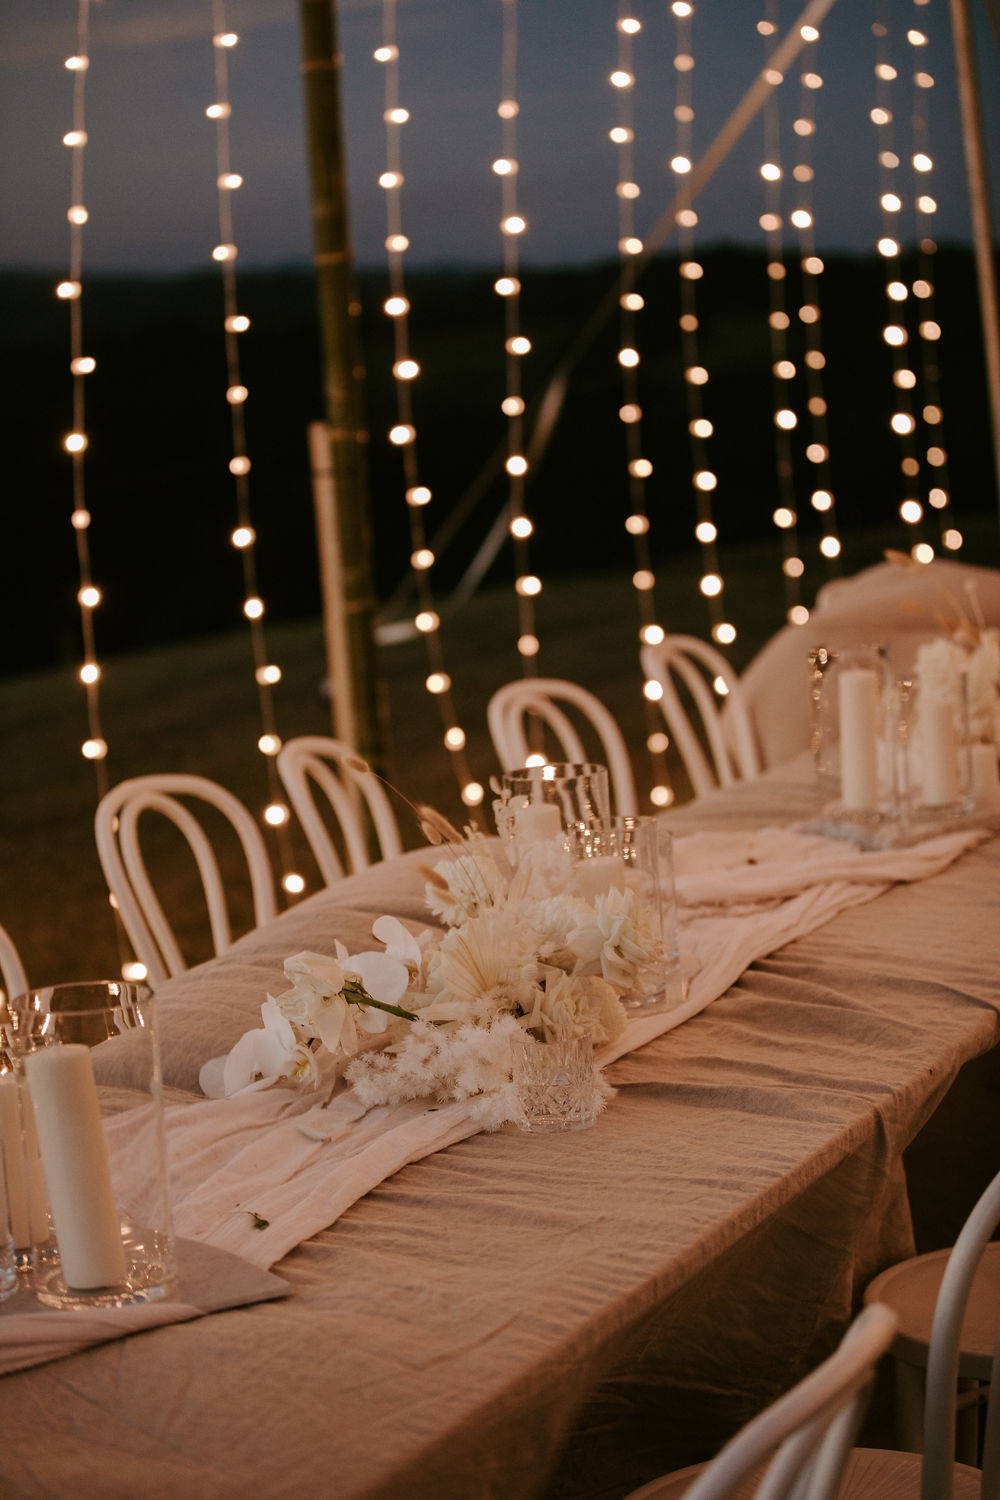 Linen tablecloth dining table underneath the fairy lights